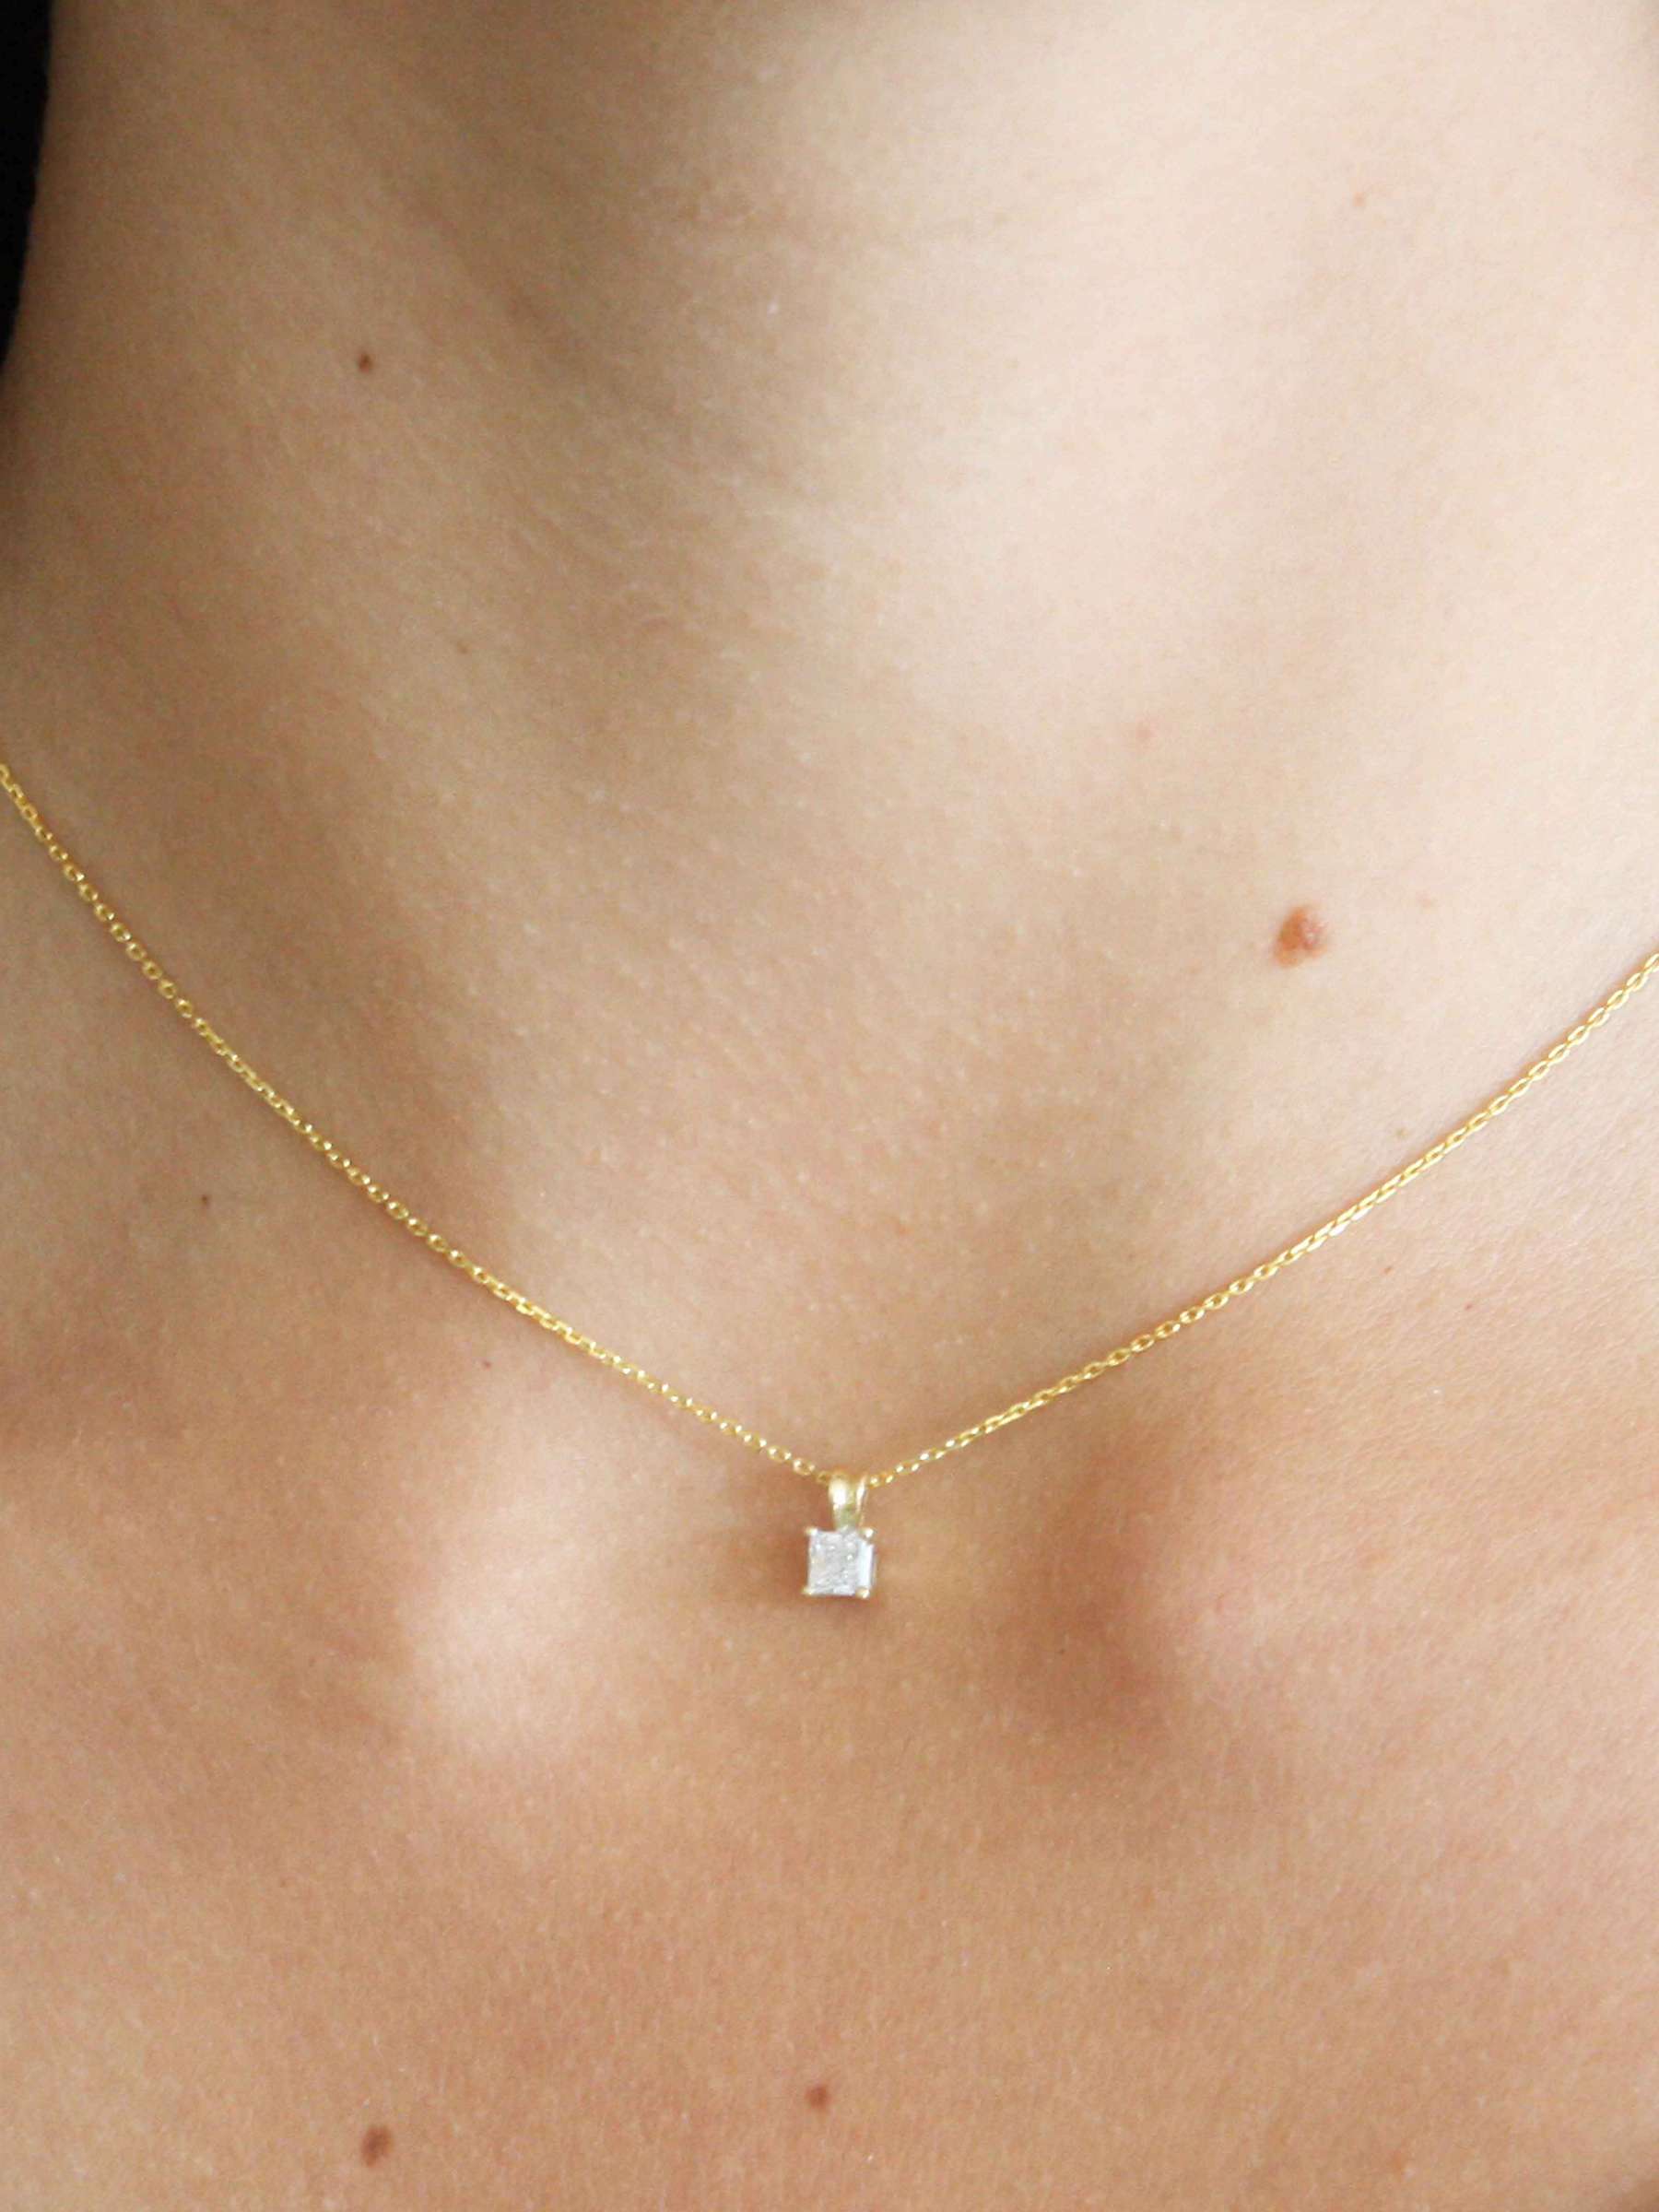 Buy Vintage Fine Jewellery Second Hand 18ct Yellow & White Gold Diamond Pendant Necklace, Dated Circa 2000s Online at johnlewis.com